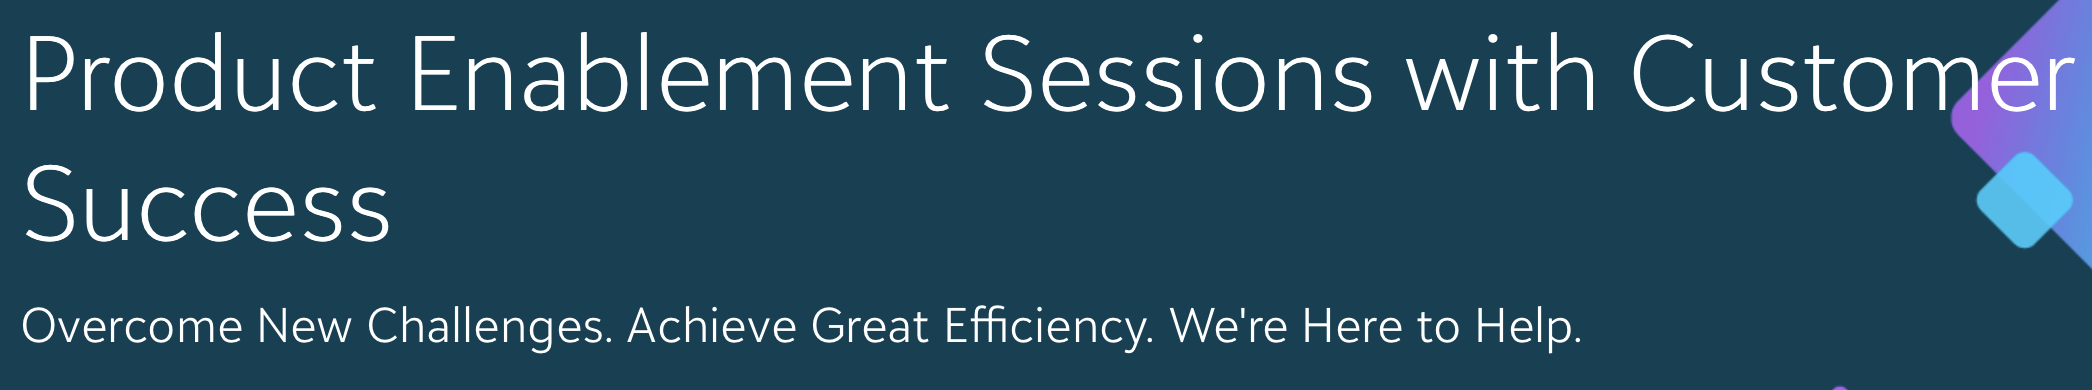 REGISTRATION NOW OPEN: (Global) Customer Success Product Enablement Sessions For May 8324